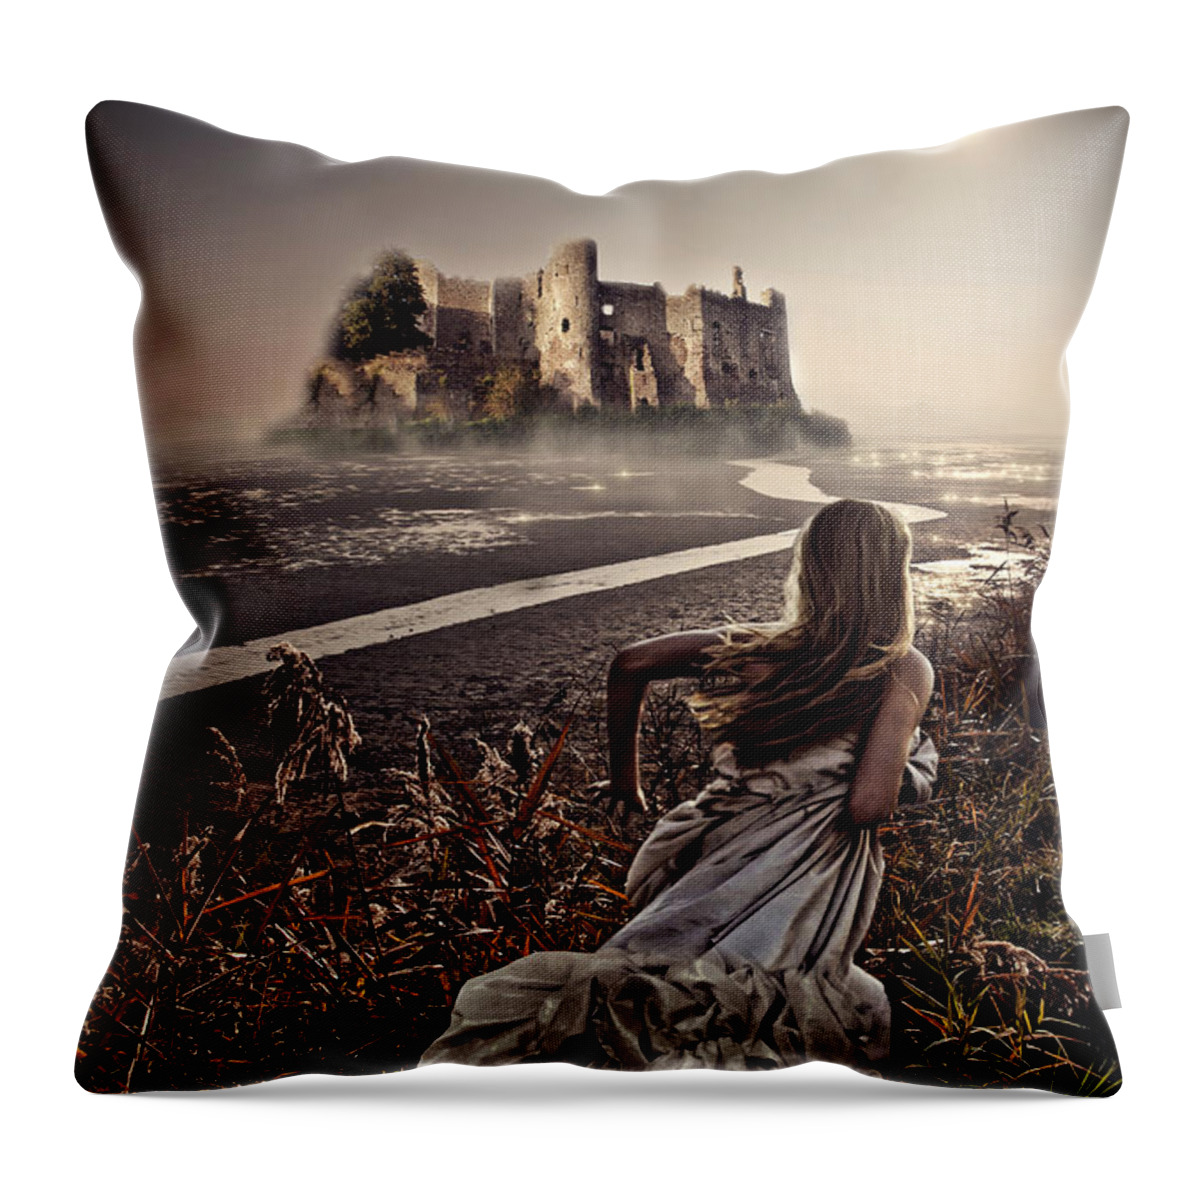 Chasing The Dreams Throw Pillow featuring the photograph Chasing the Dreams by Mo T